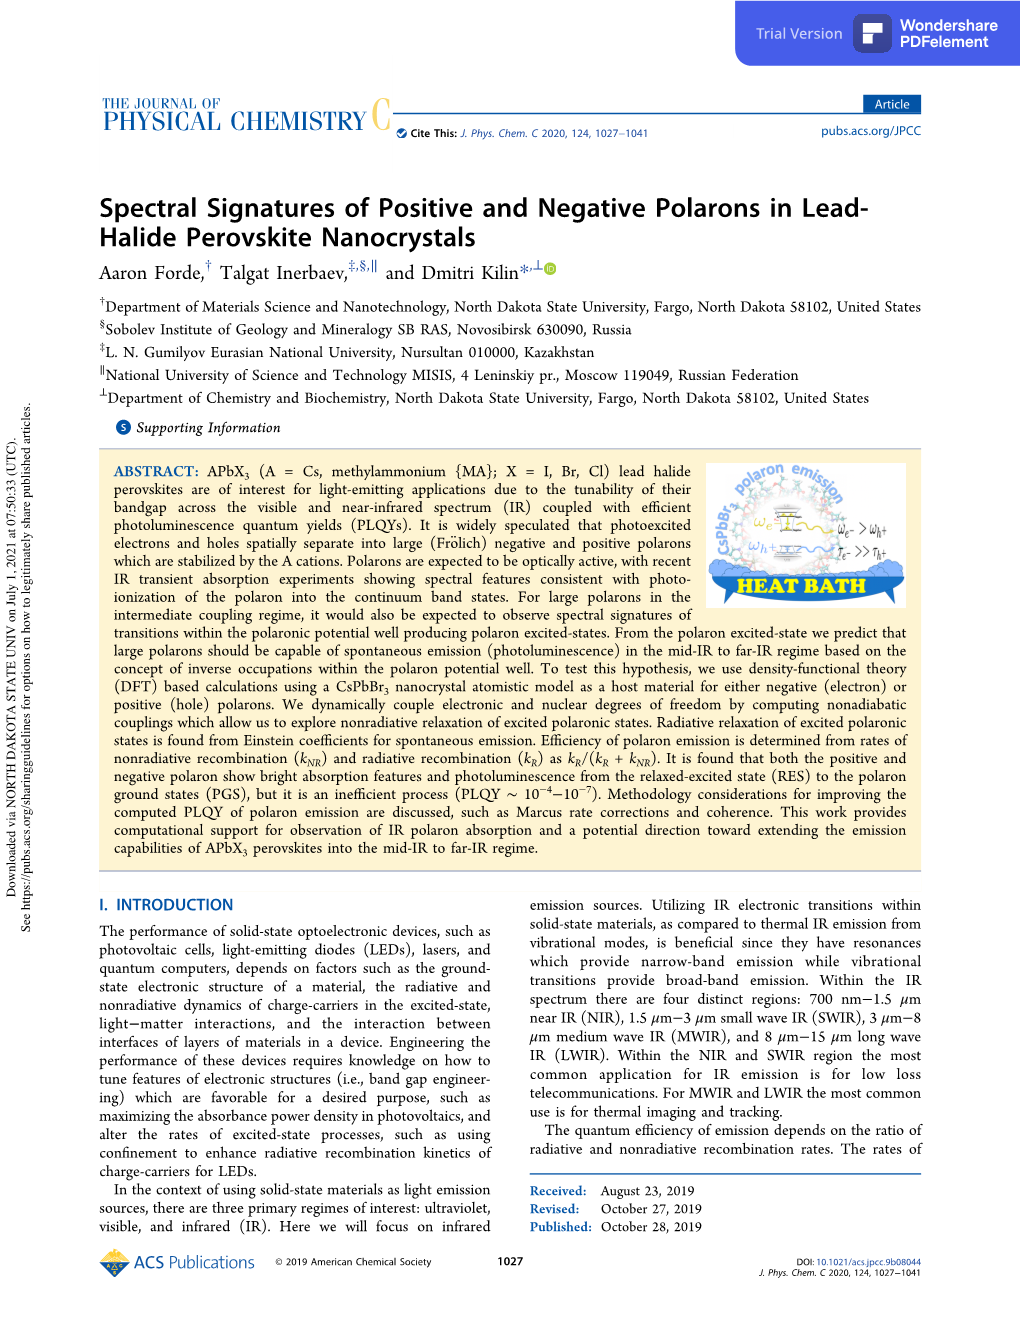 Spectral Signatures of Positive and Negative Polarons in Lead-Halide